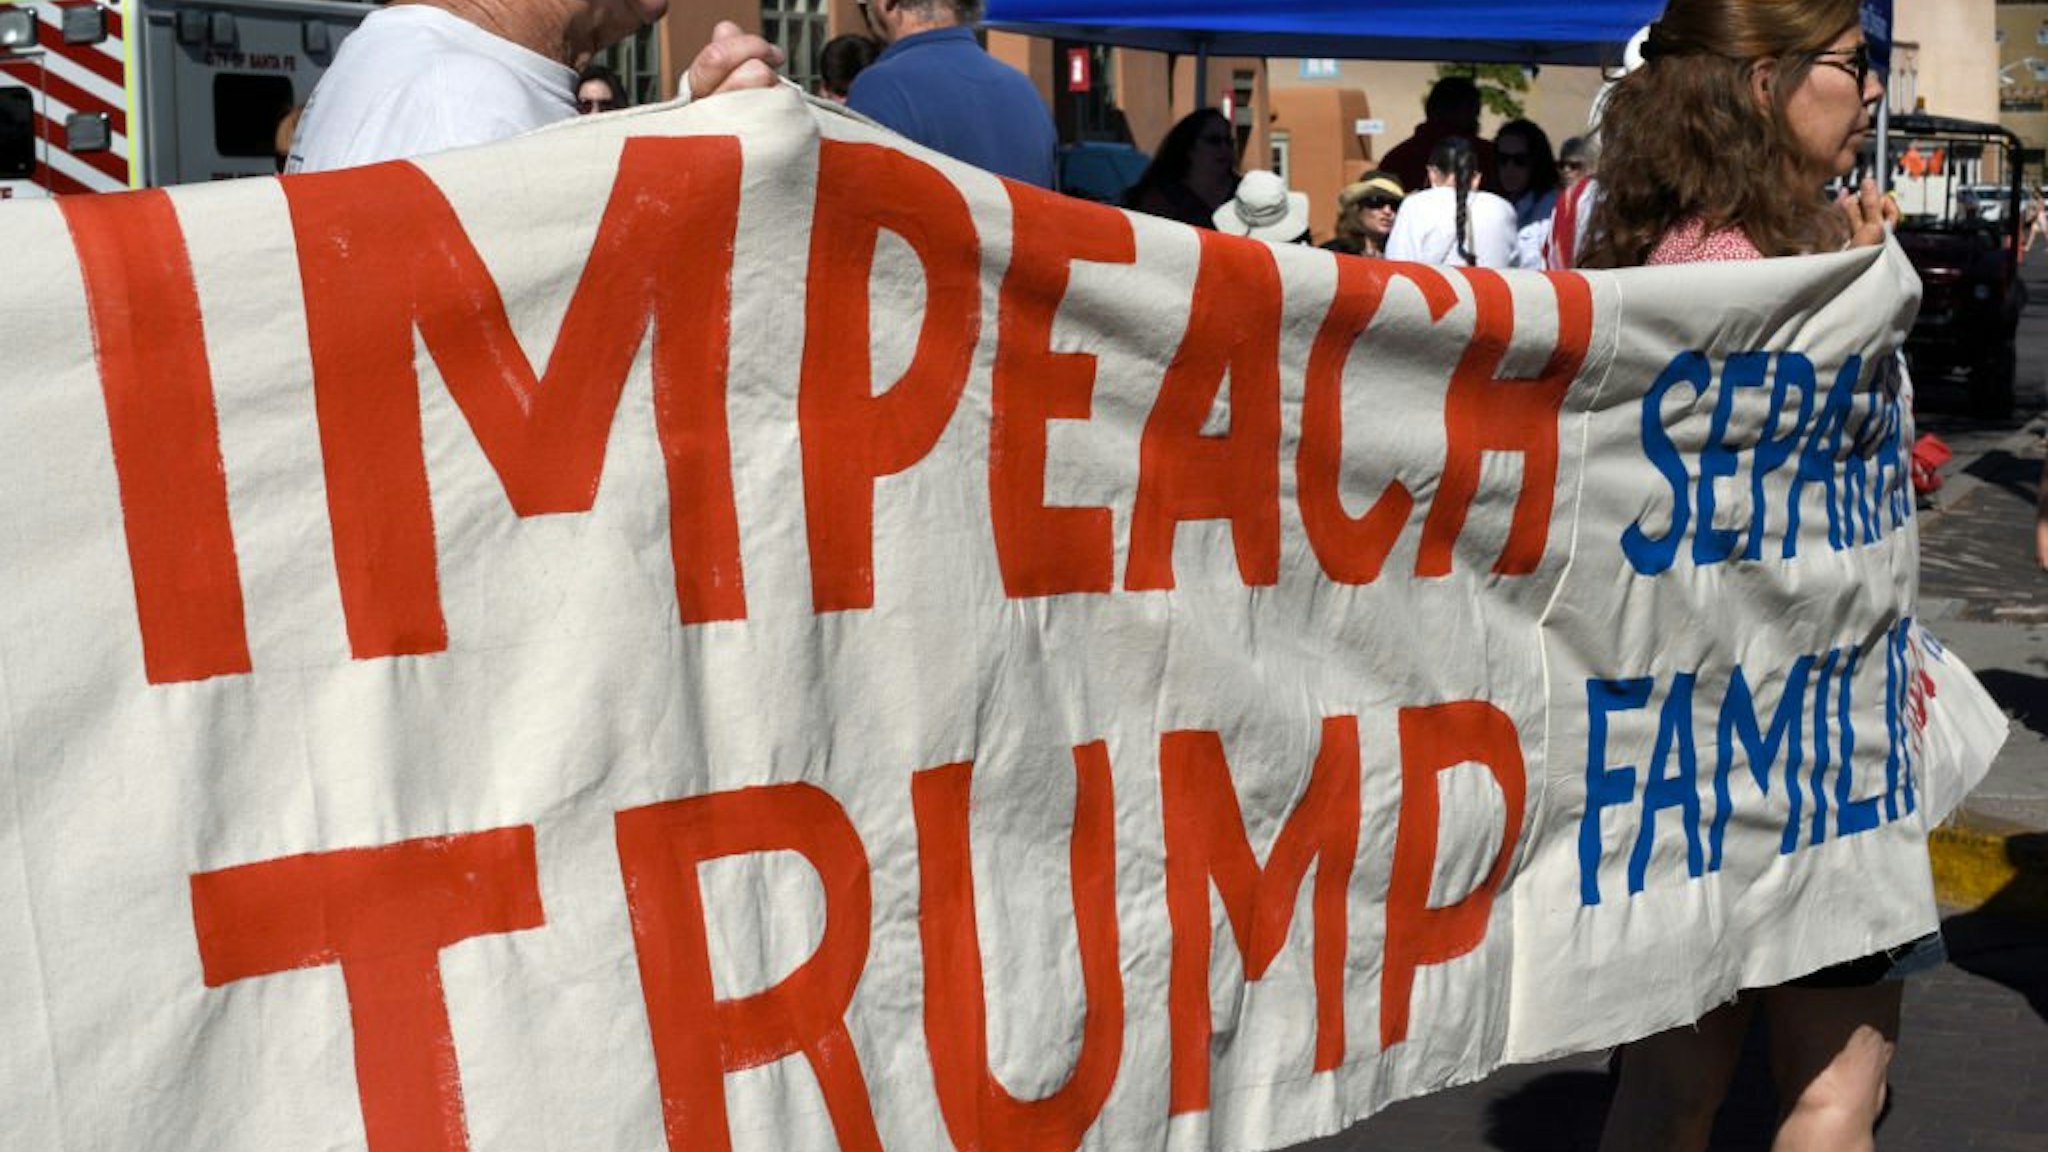 Demonstrators carry a banner supporting the impeachment of Trump at a Fourth of July event in Santa Fe, New Mexico